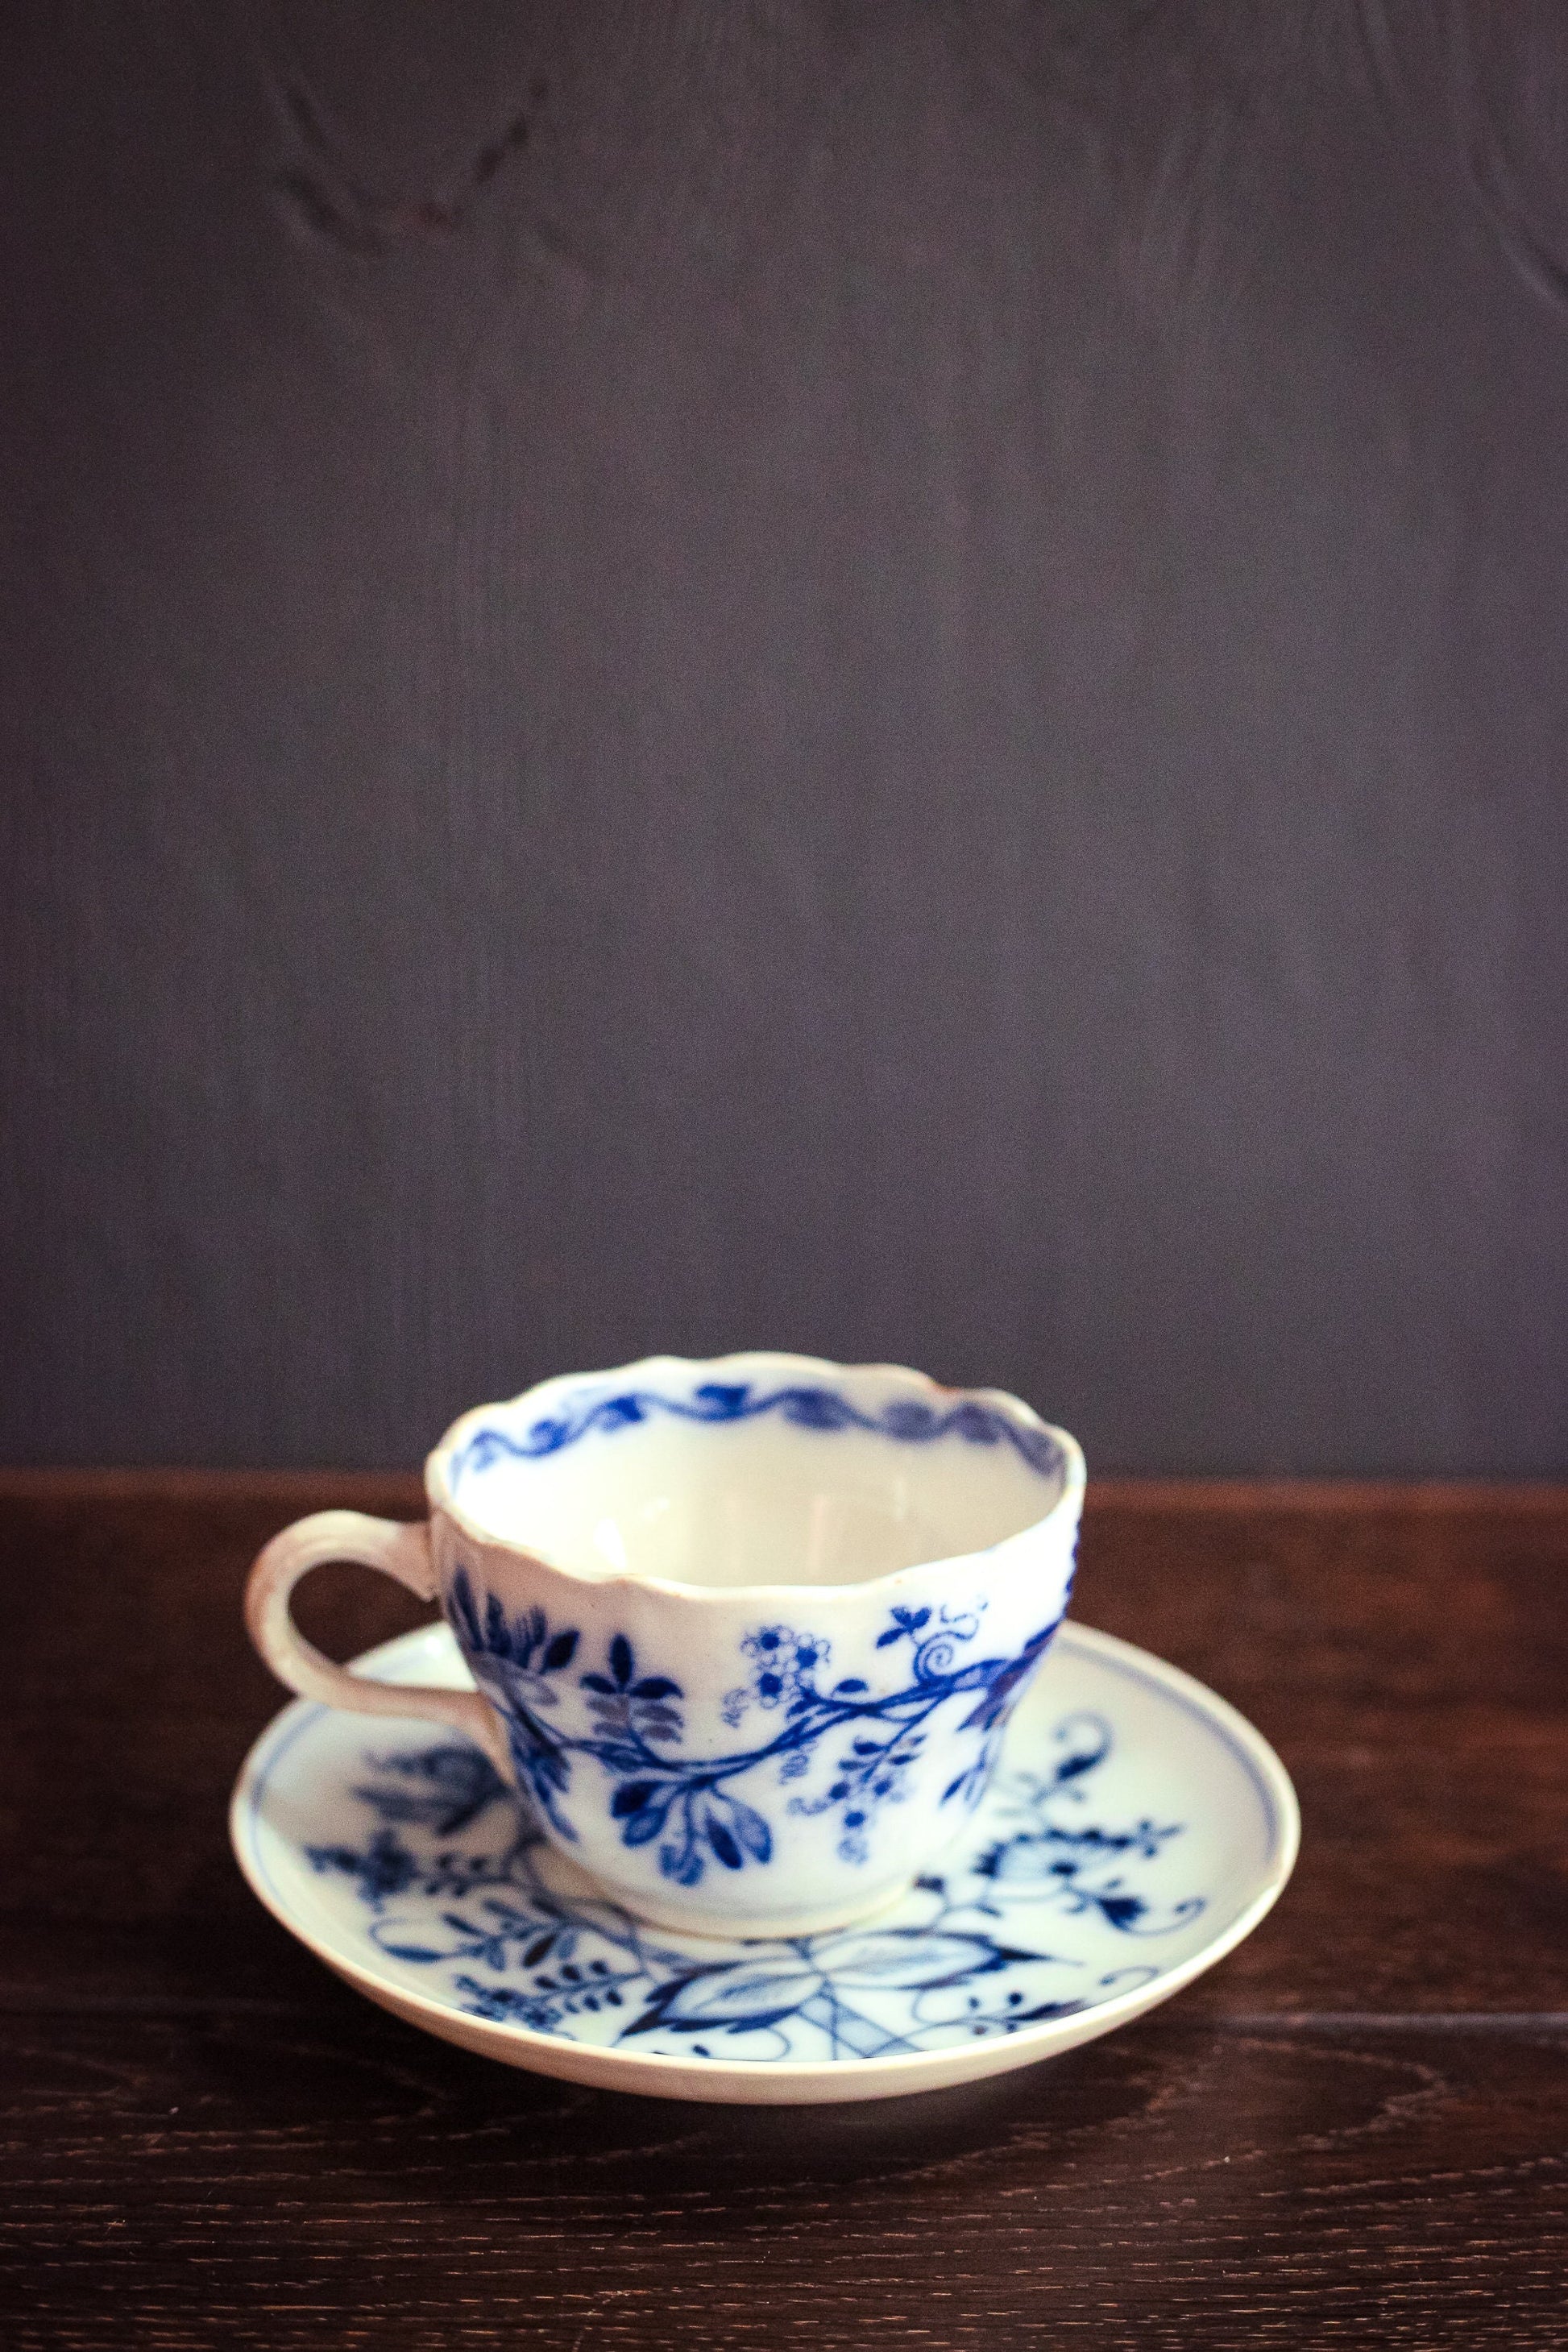 Antique Meissen Blue Onion Cup & Saucer - Germany Meissen Blue White Ceramic Tea Cup Saucer Oval Backstamp